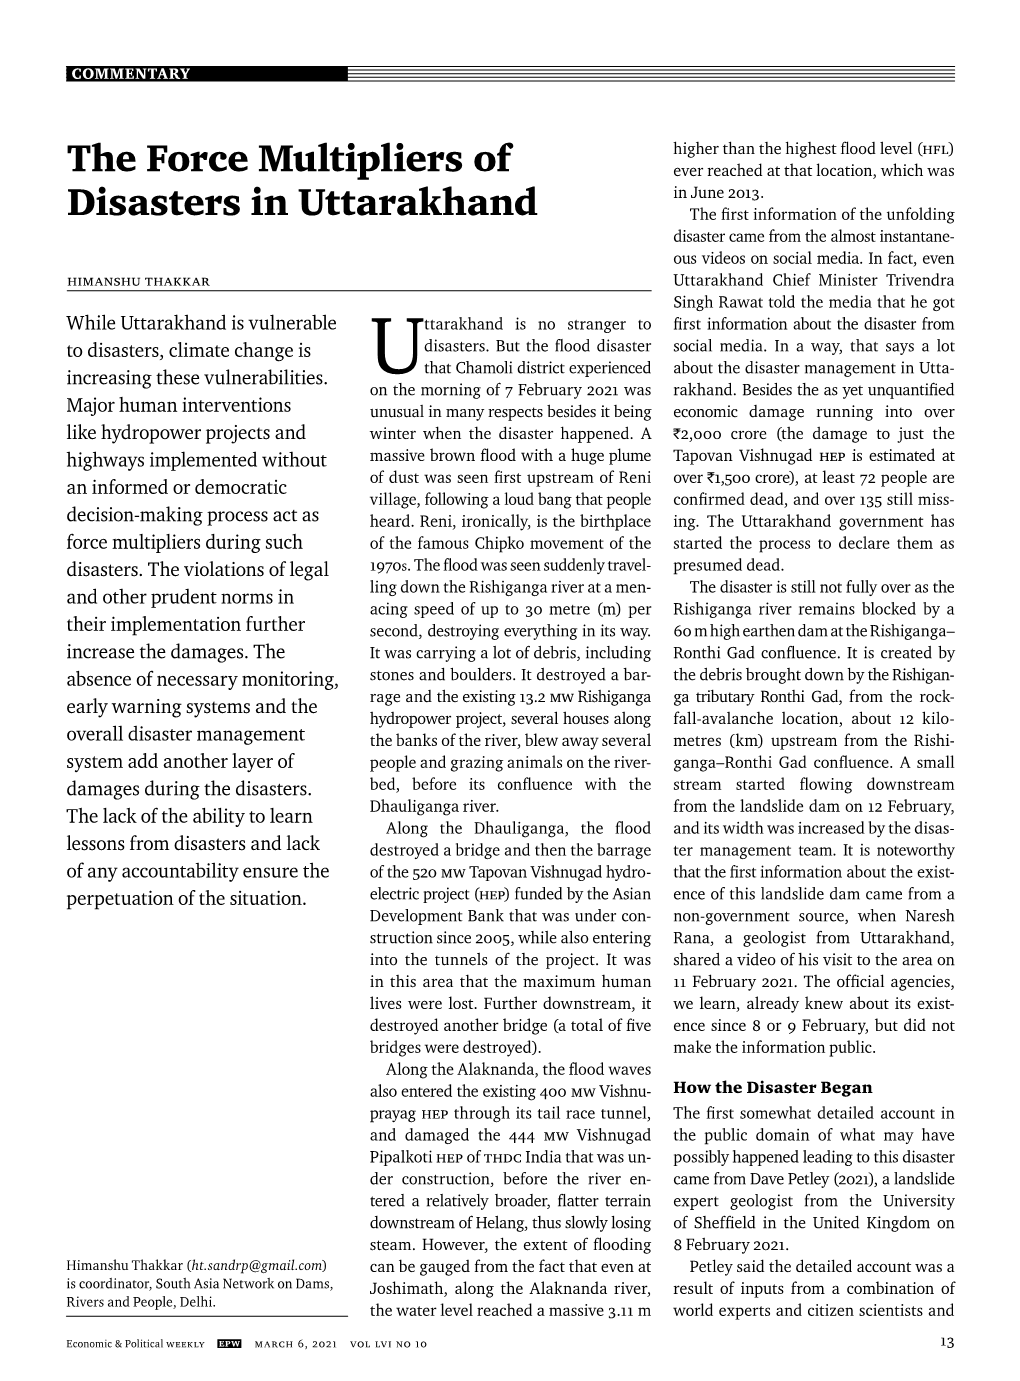 The Force Multipliers of Disasters in Uttarakhand